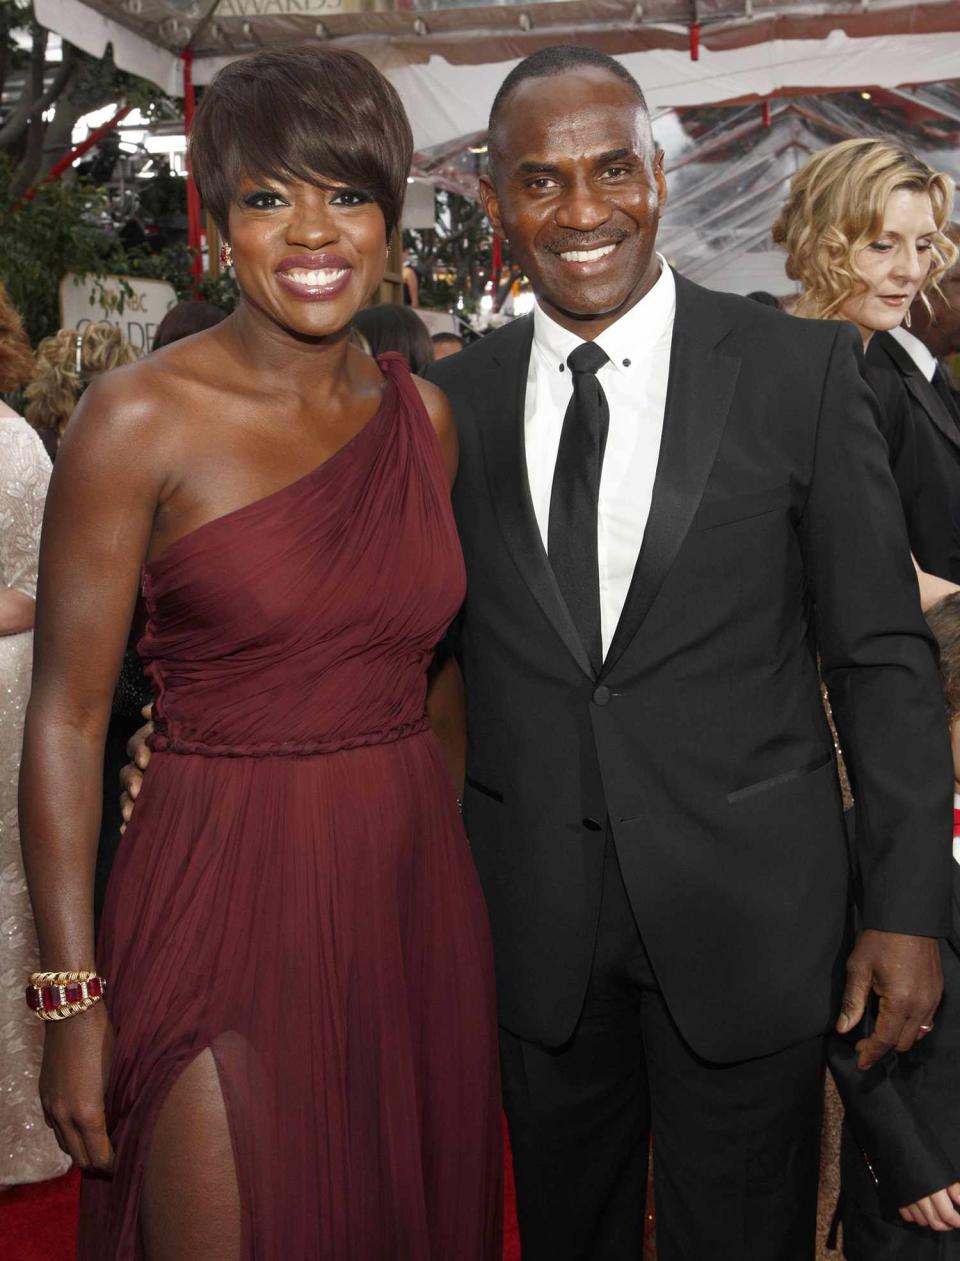 Viola Davis and husband Julius Tennon arrive at the 69th Annual Golden Globe Awards held at the Beverly Hilton Hotel on January 15, 2012